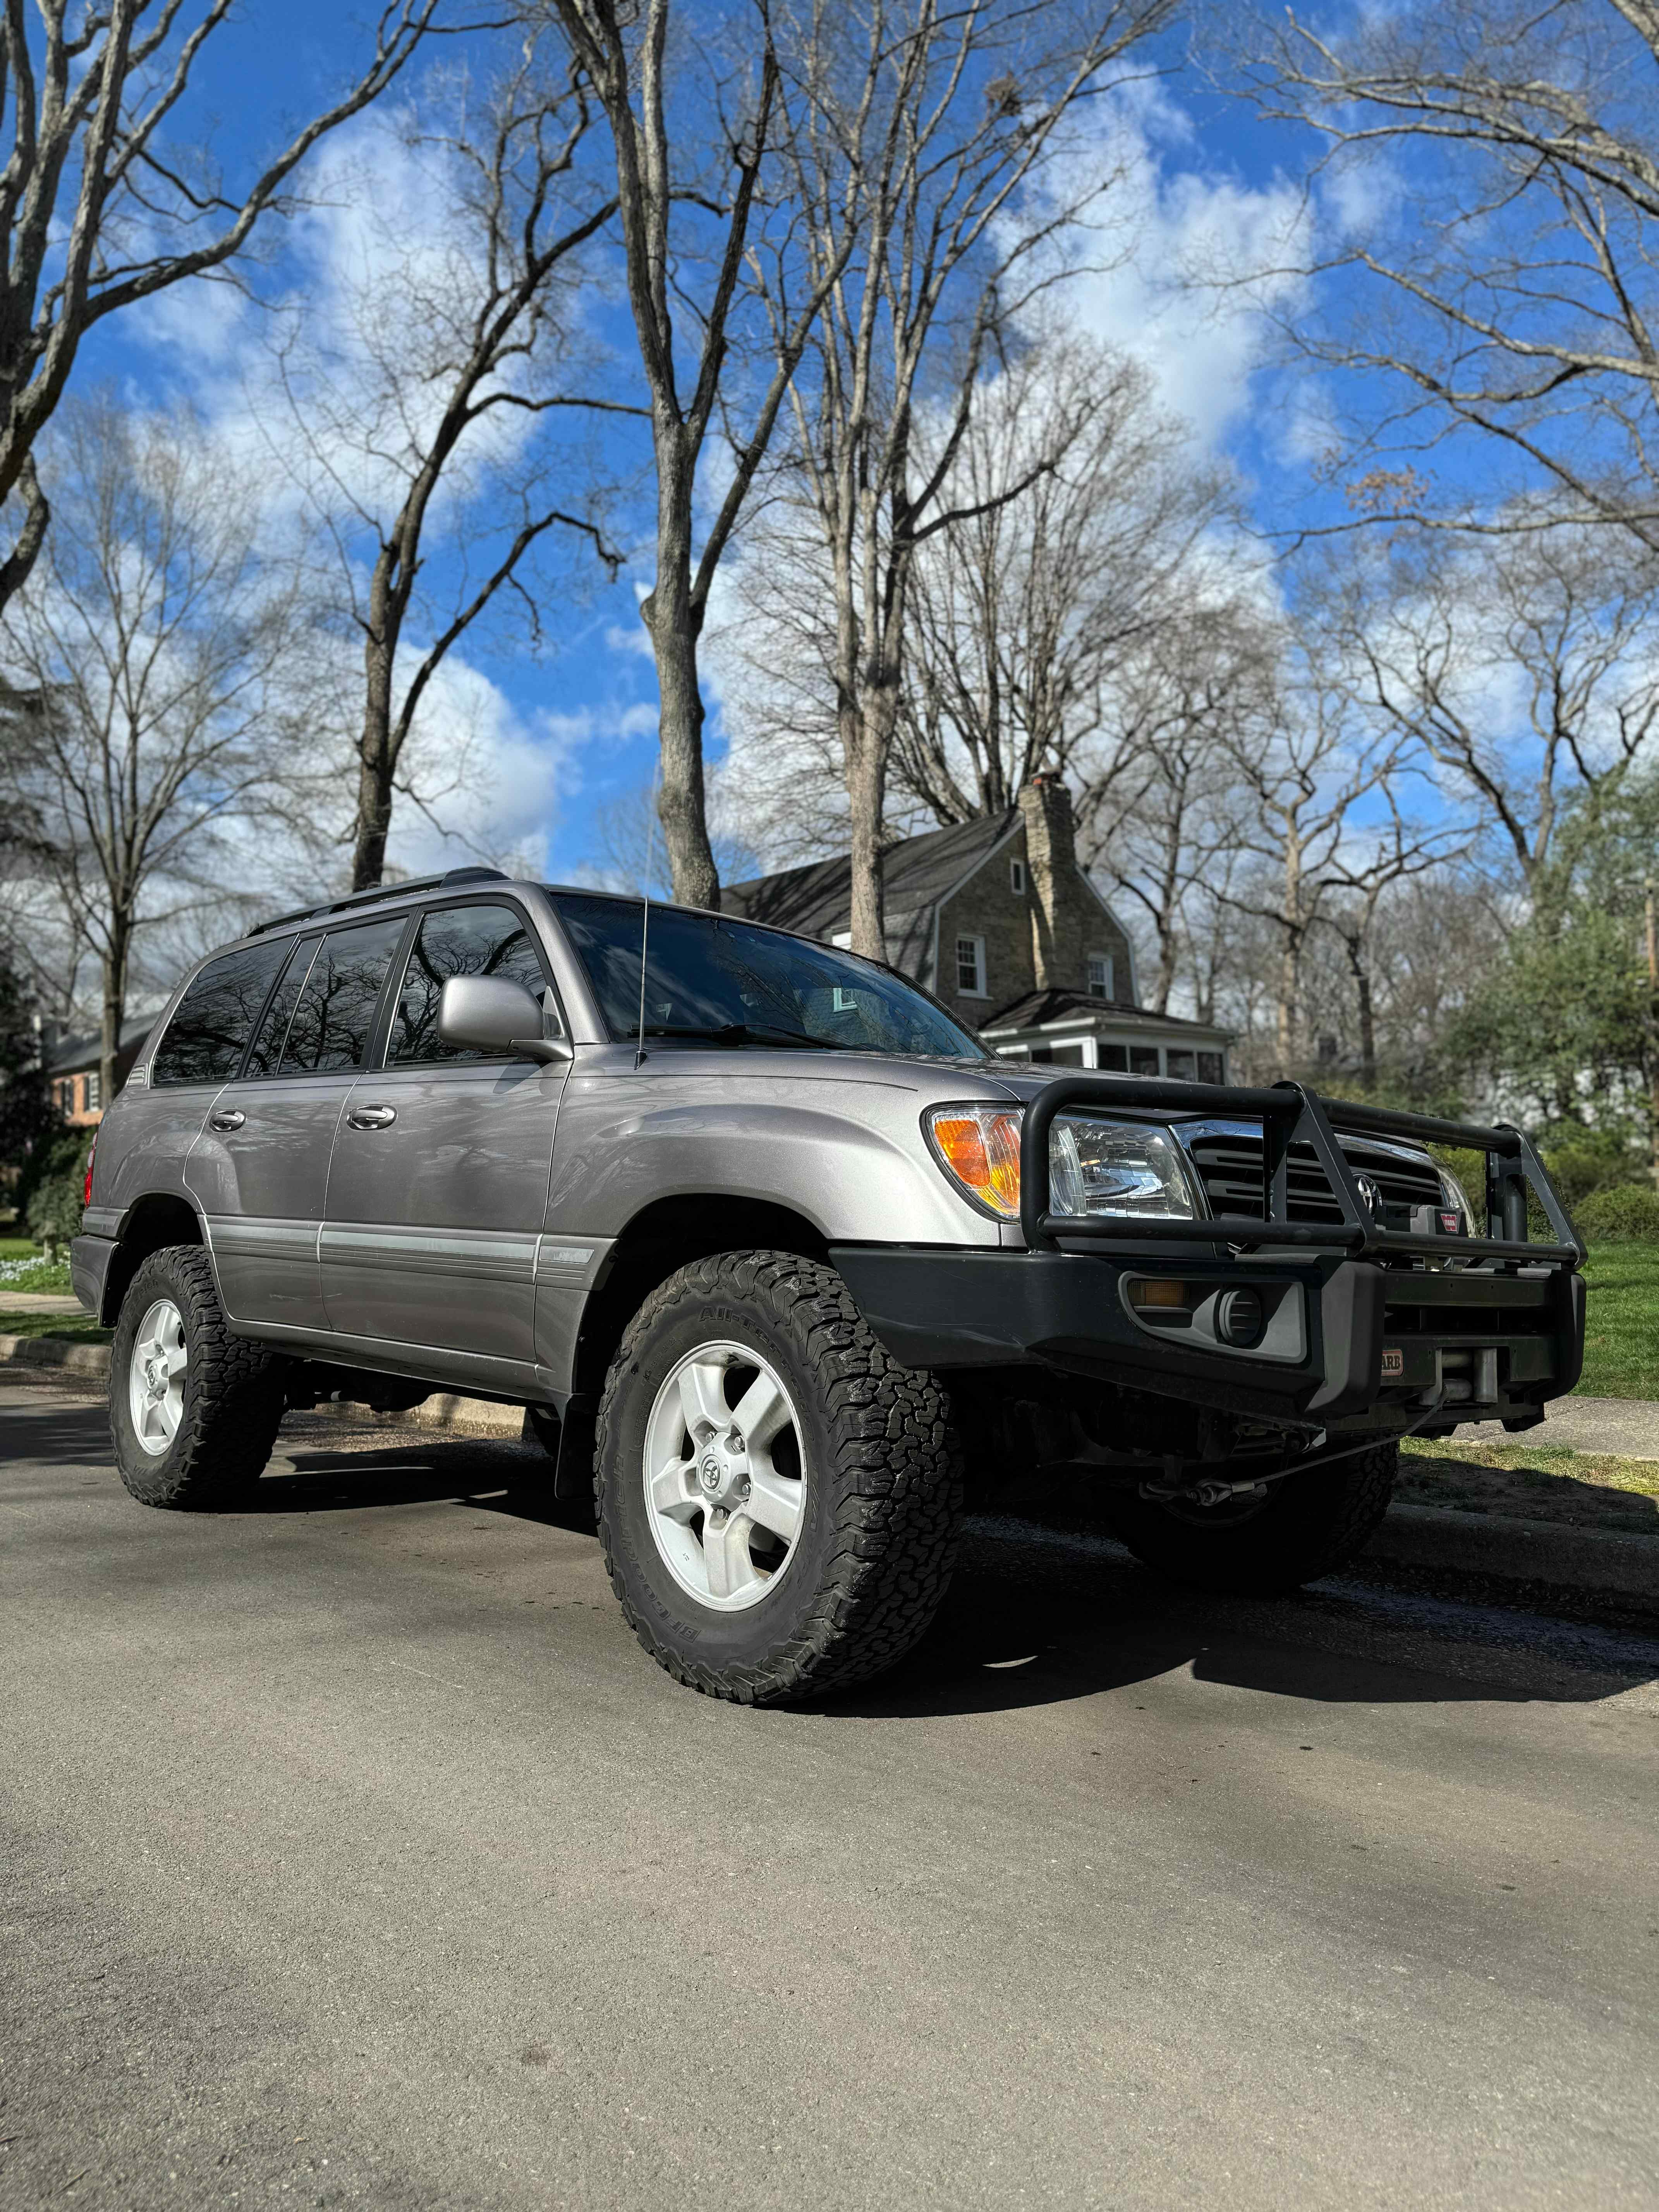 2004-toyota-land-cruiser-for-sale-06